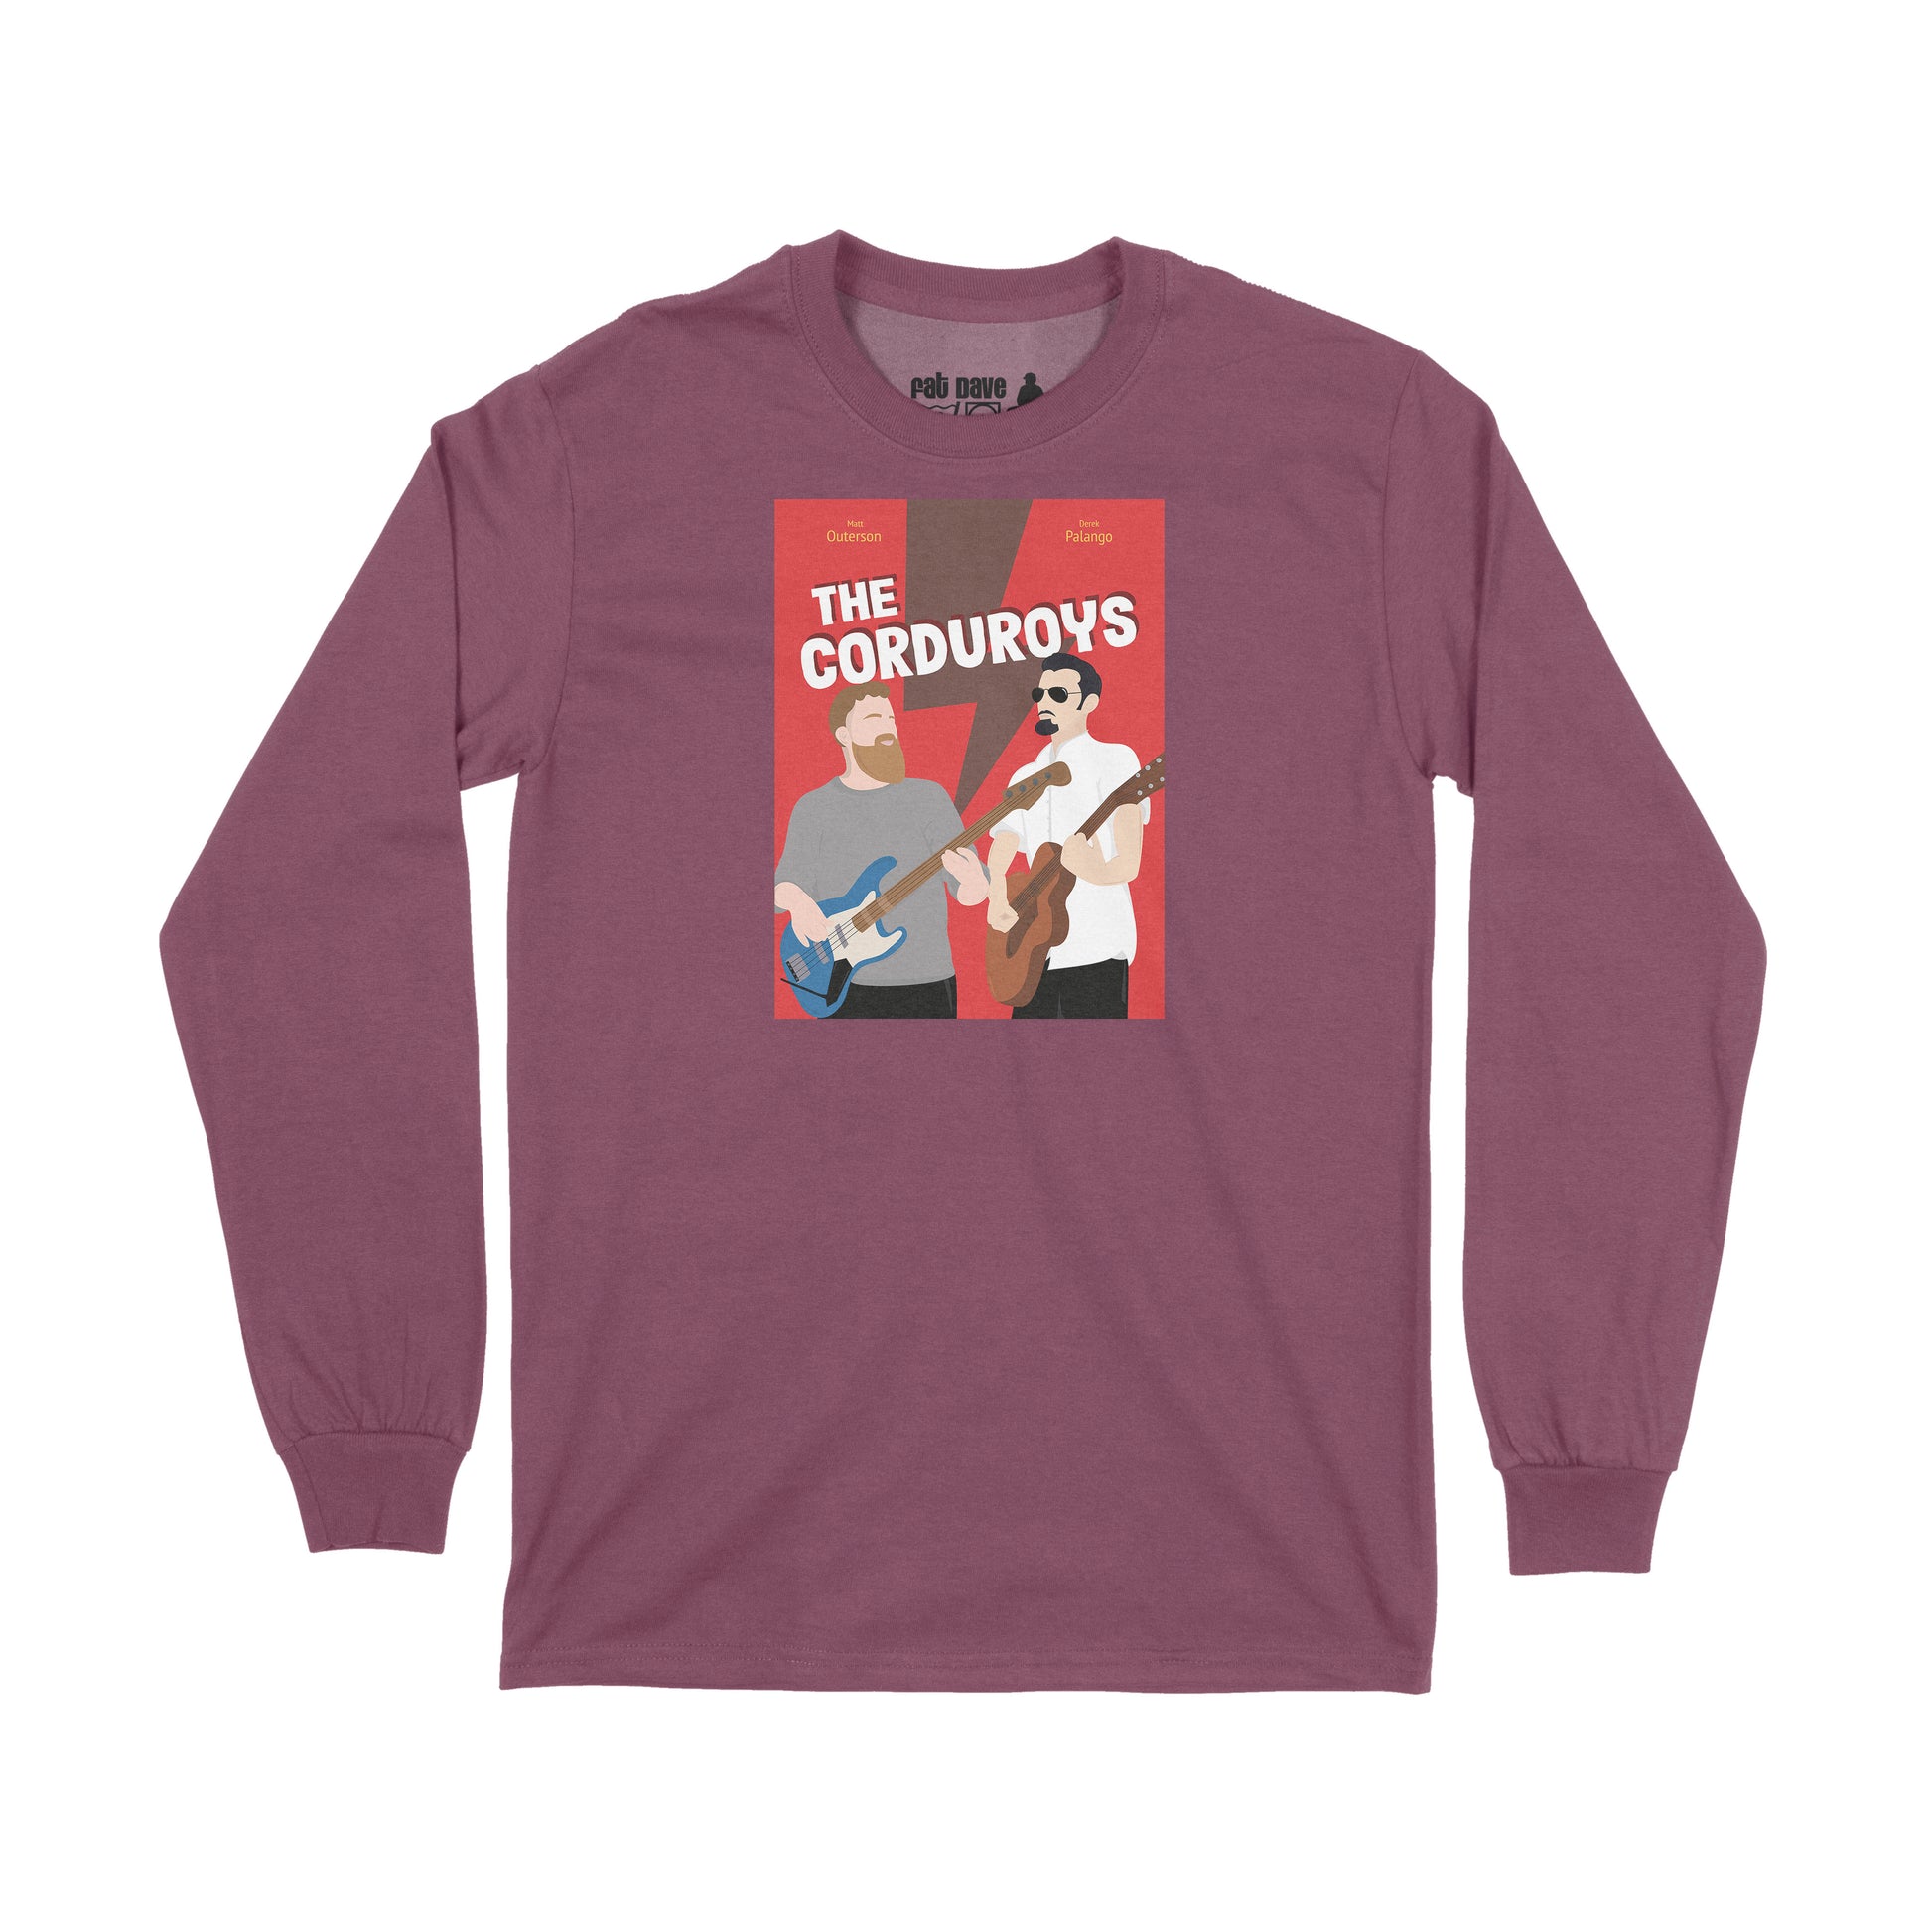 Brantford, Fat Dave, Long Sleeve T-Shirt, Musician, Poster, The Corduroys, Maroon